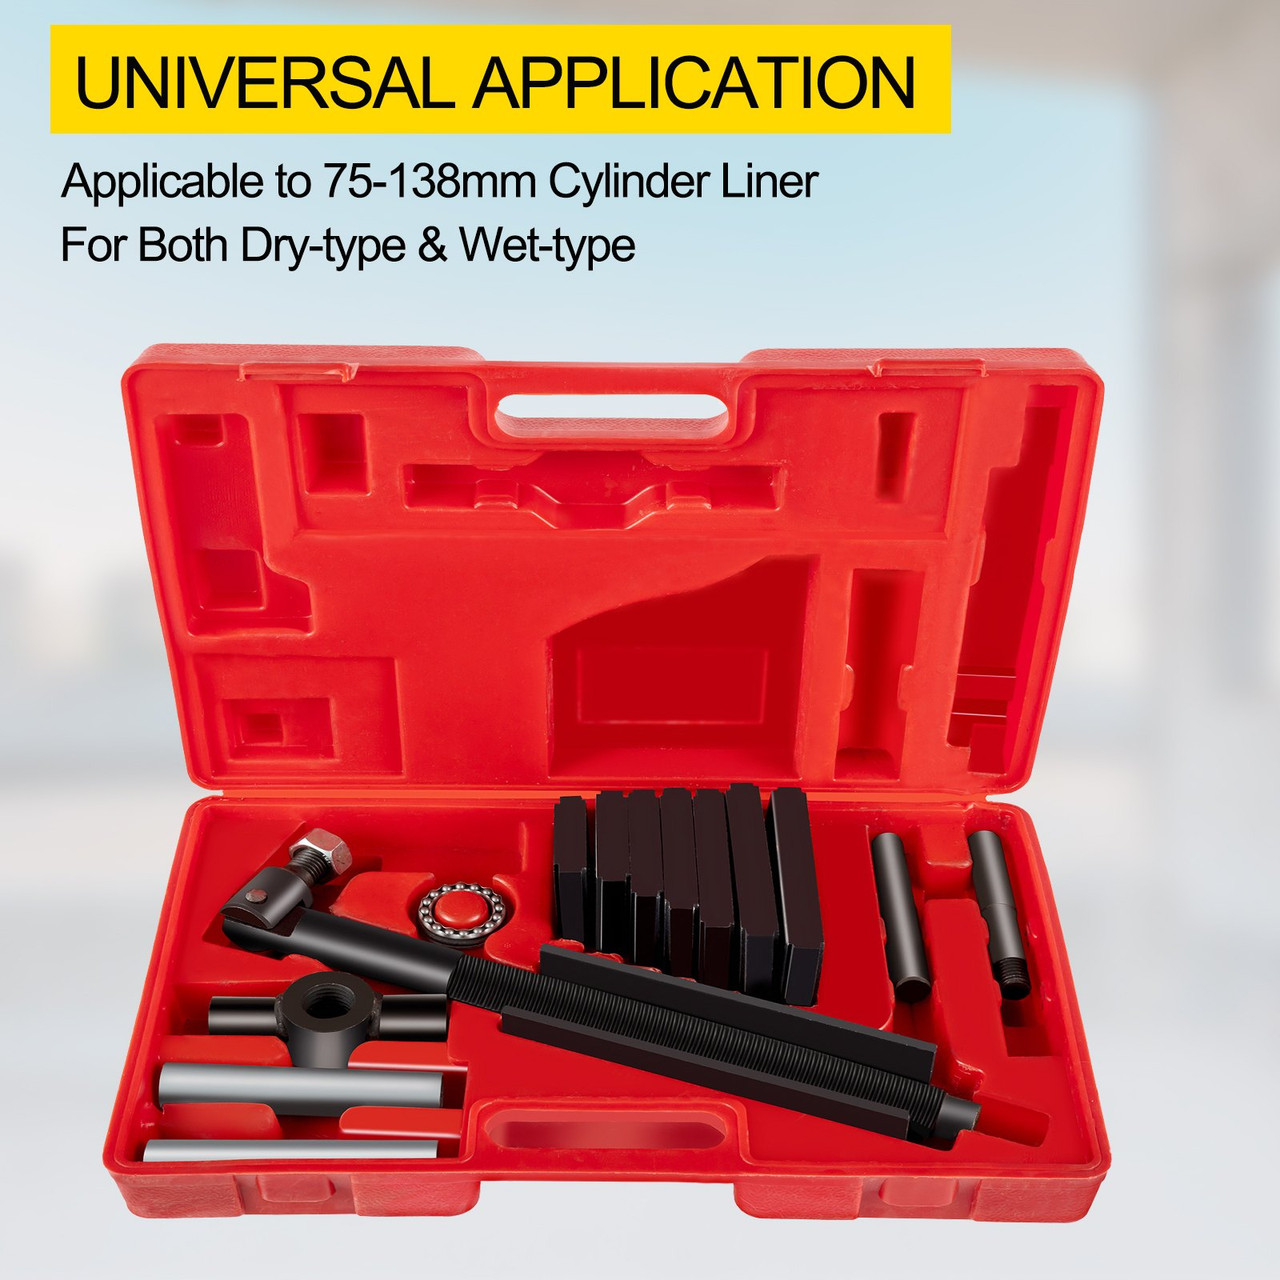 Liner Puller Cylinder Liner Puller, Diesel Engines Liner Puller Tool, Both Dry-Type and Wet-Type Fit Diameter of 75 mm-138 mm, Universal Cylinder Liner Puller Tool Set for Auto Repair